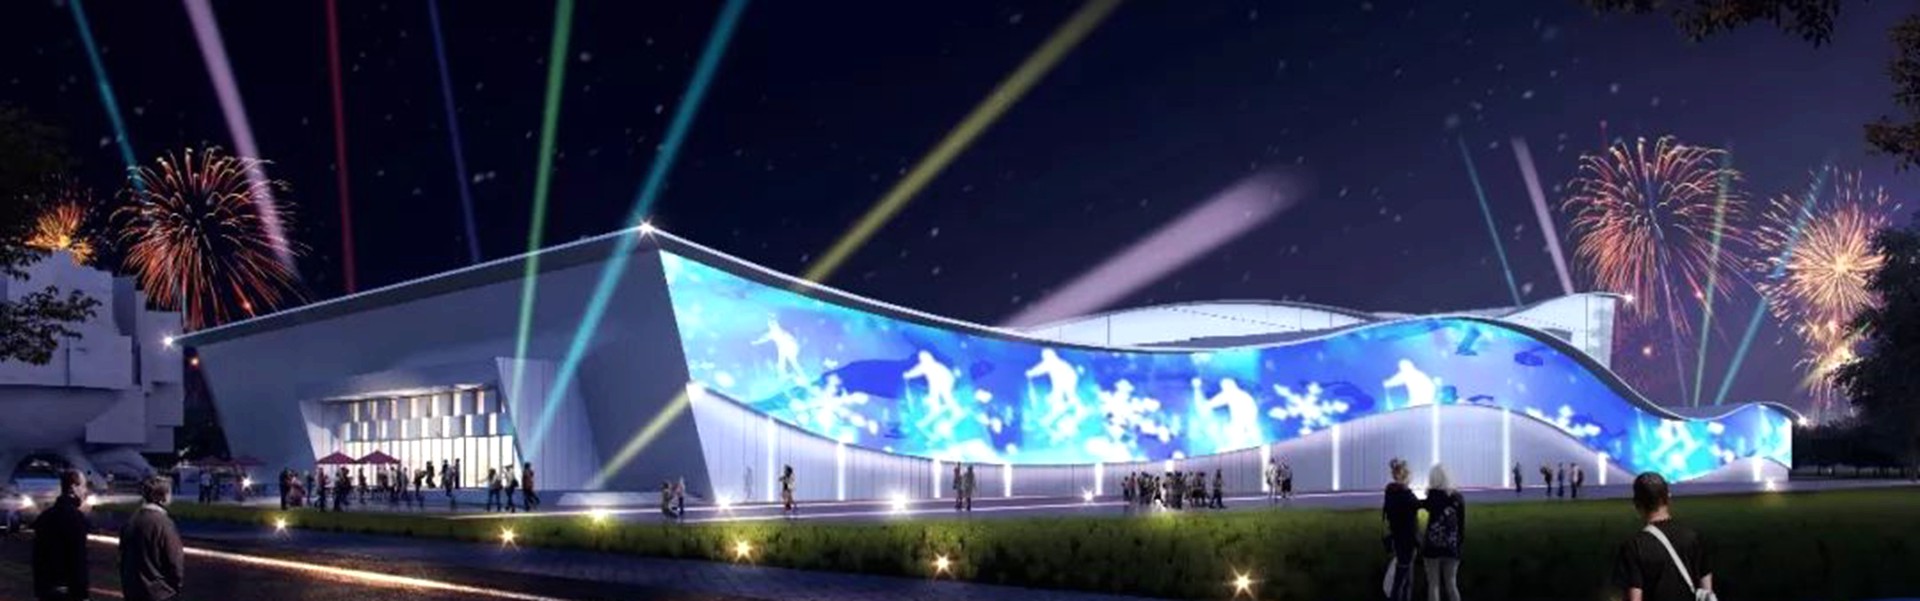 Tus-Holdings (Beijing, China): Ski Hall of Snow Cube Ice and Snow World - 2573 T